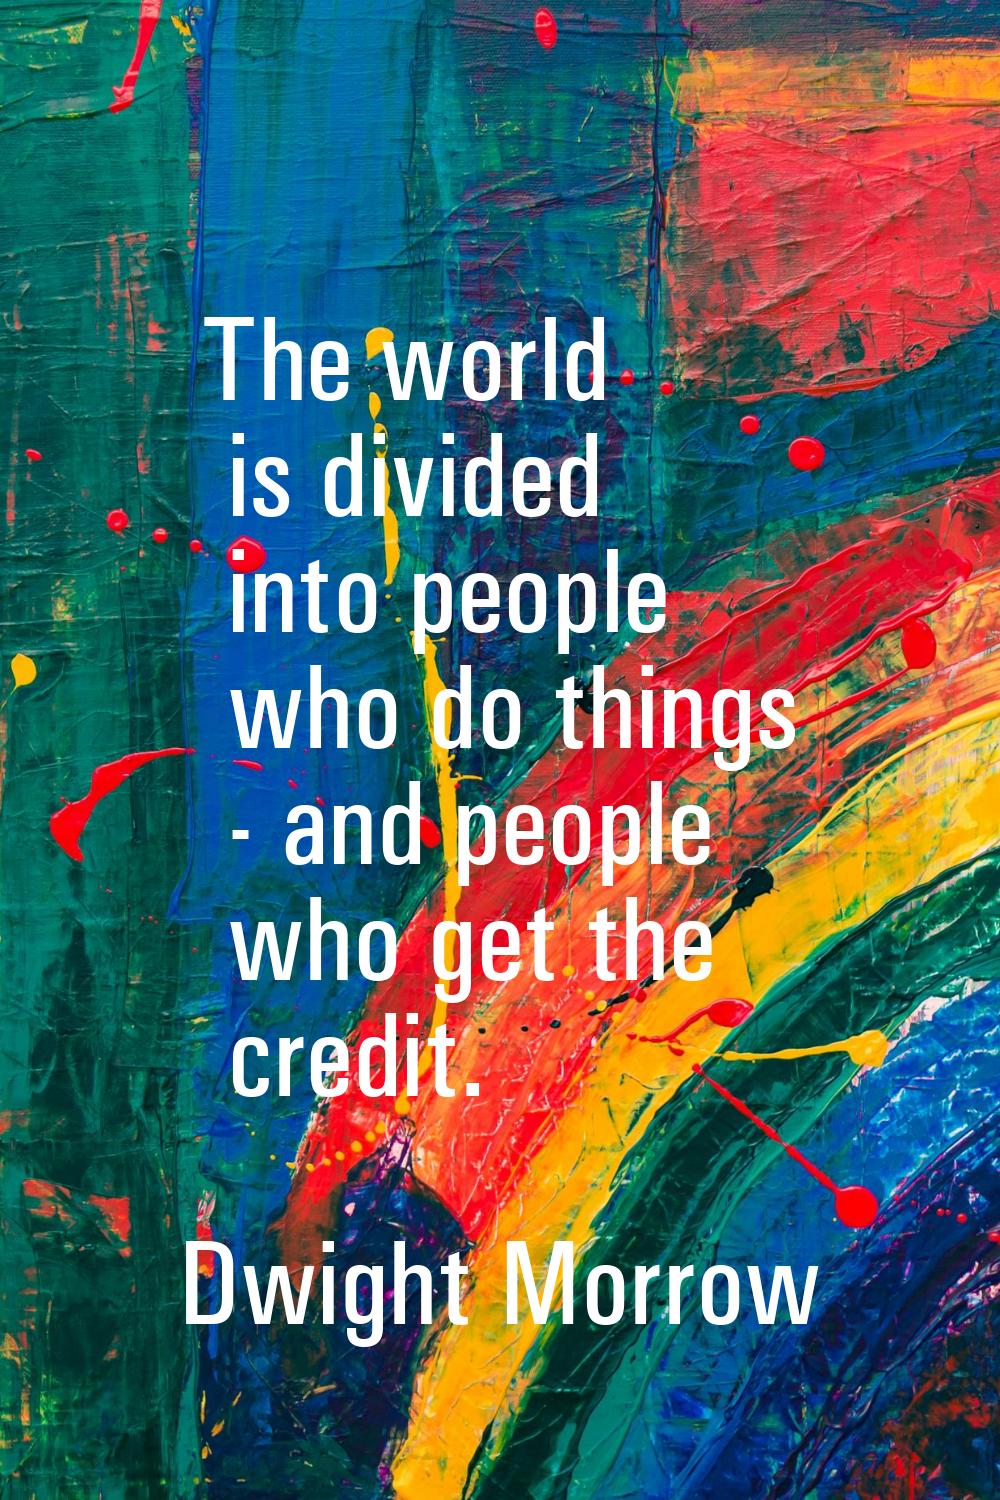 The world is divided into people who do things - and people who get the credit.